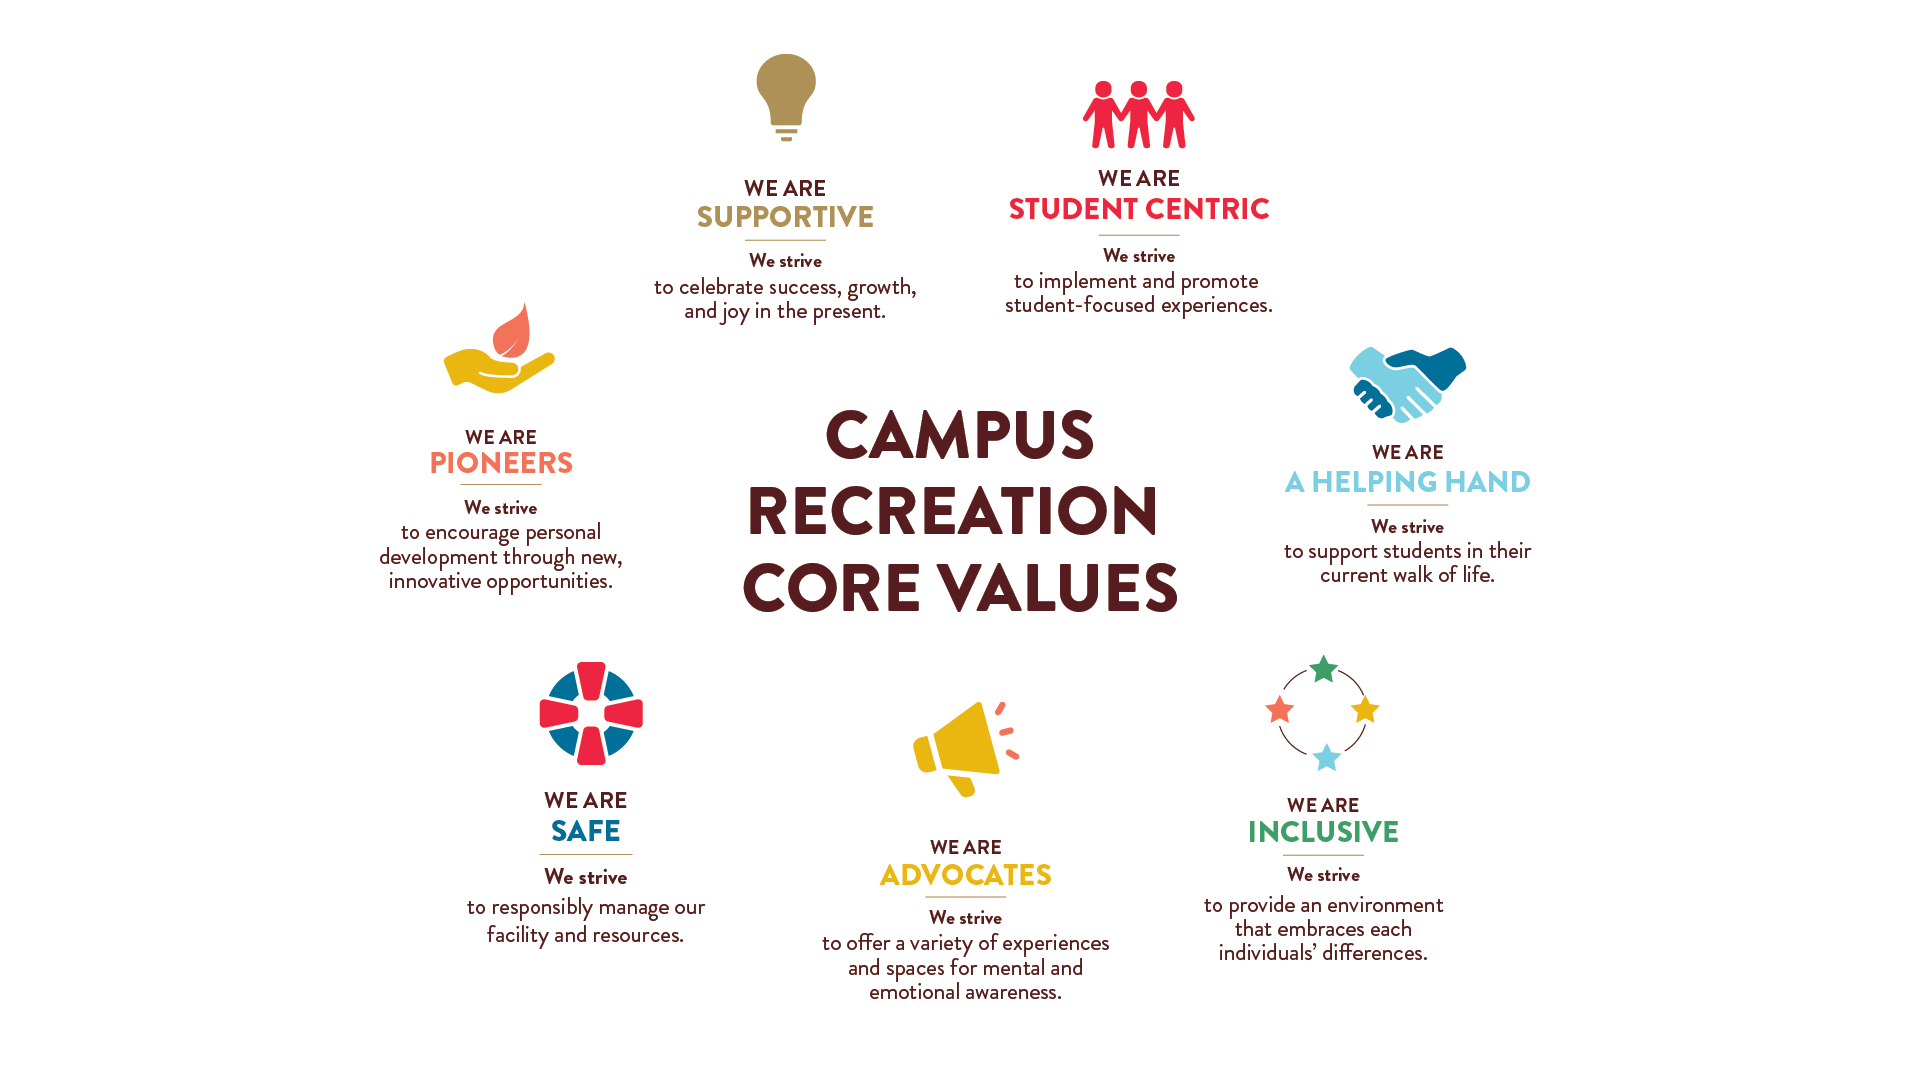 Texas State Recreation's Core Values, supportive, student centric, offering a helping hand, inclusive, advocating, be safe, and be pioneers.